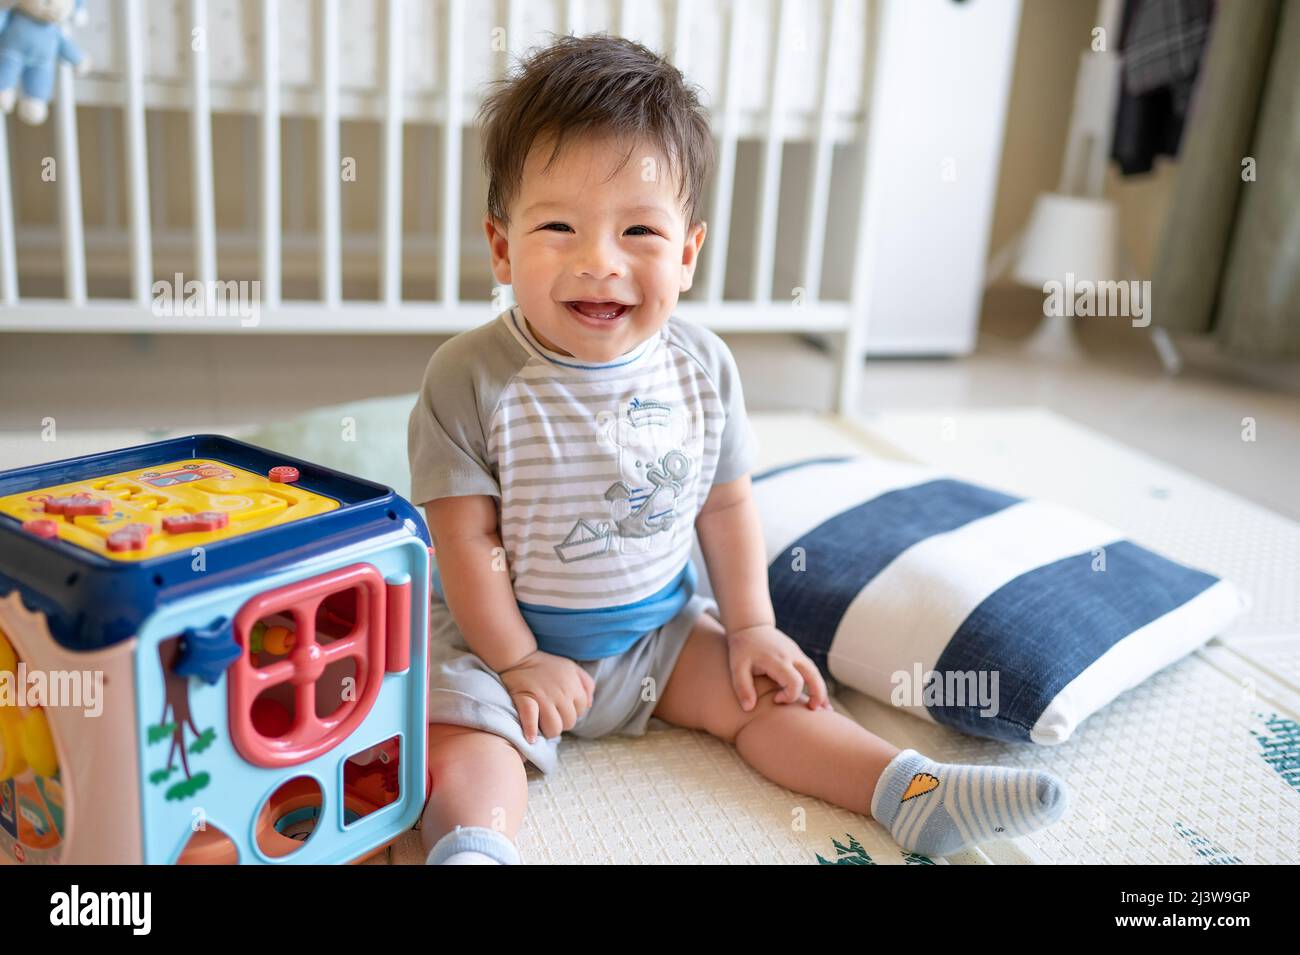 Adorable 8 months old mixed race baby boy smiling playing with activity box in the bedroom while sitting on the floor covered with a rubber play mat Stock Photo